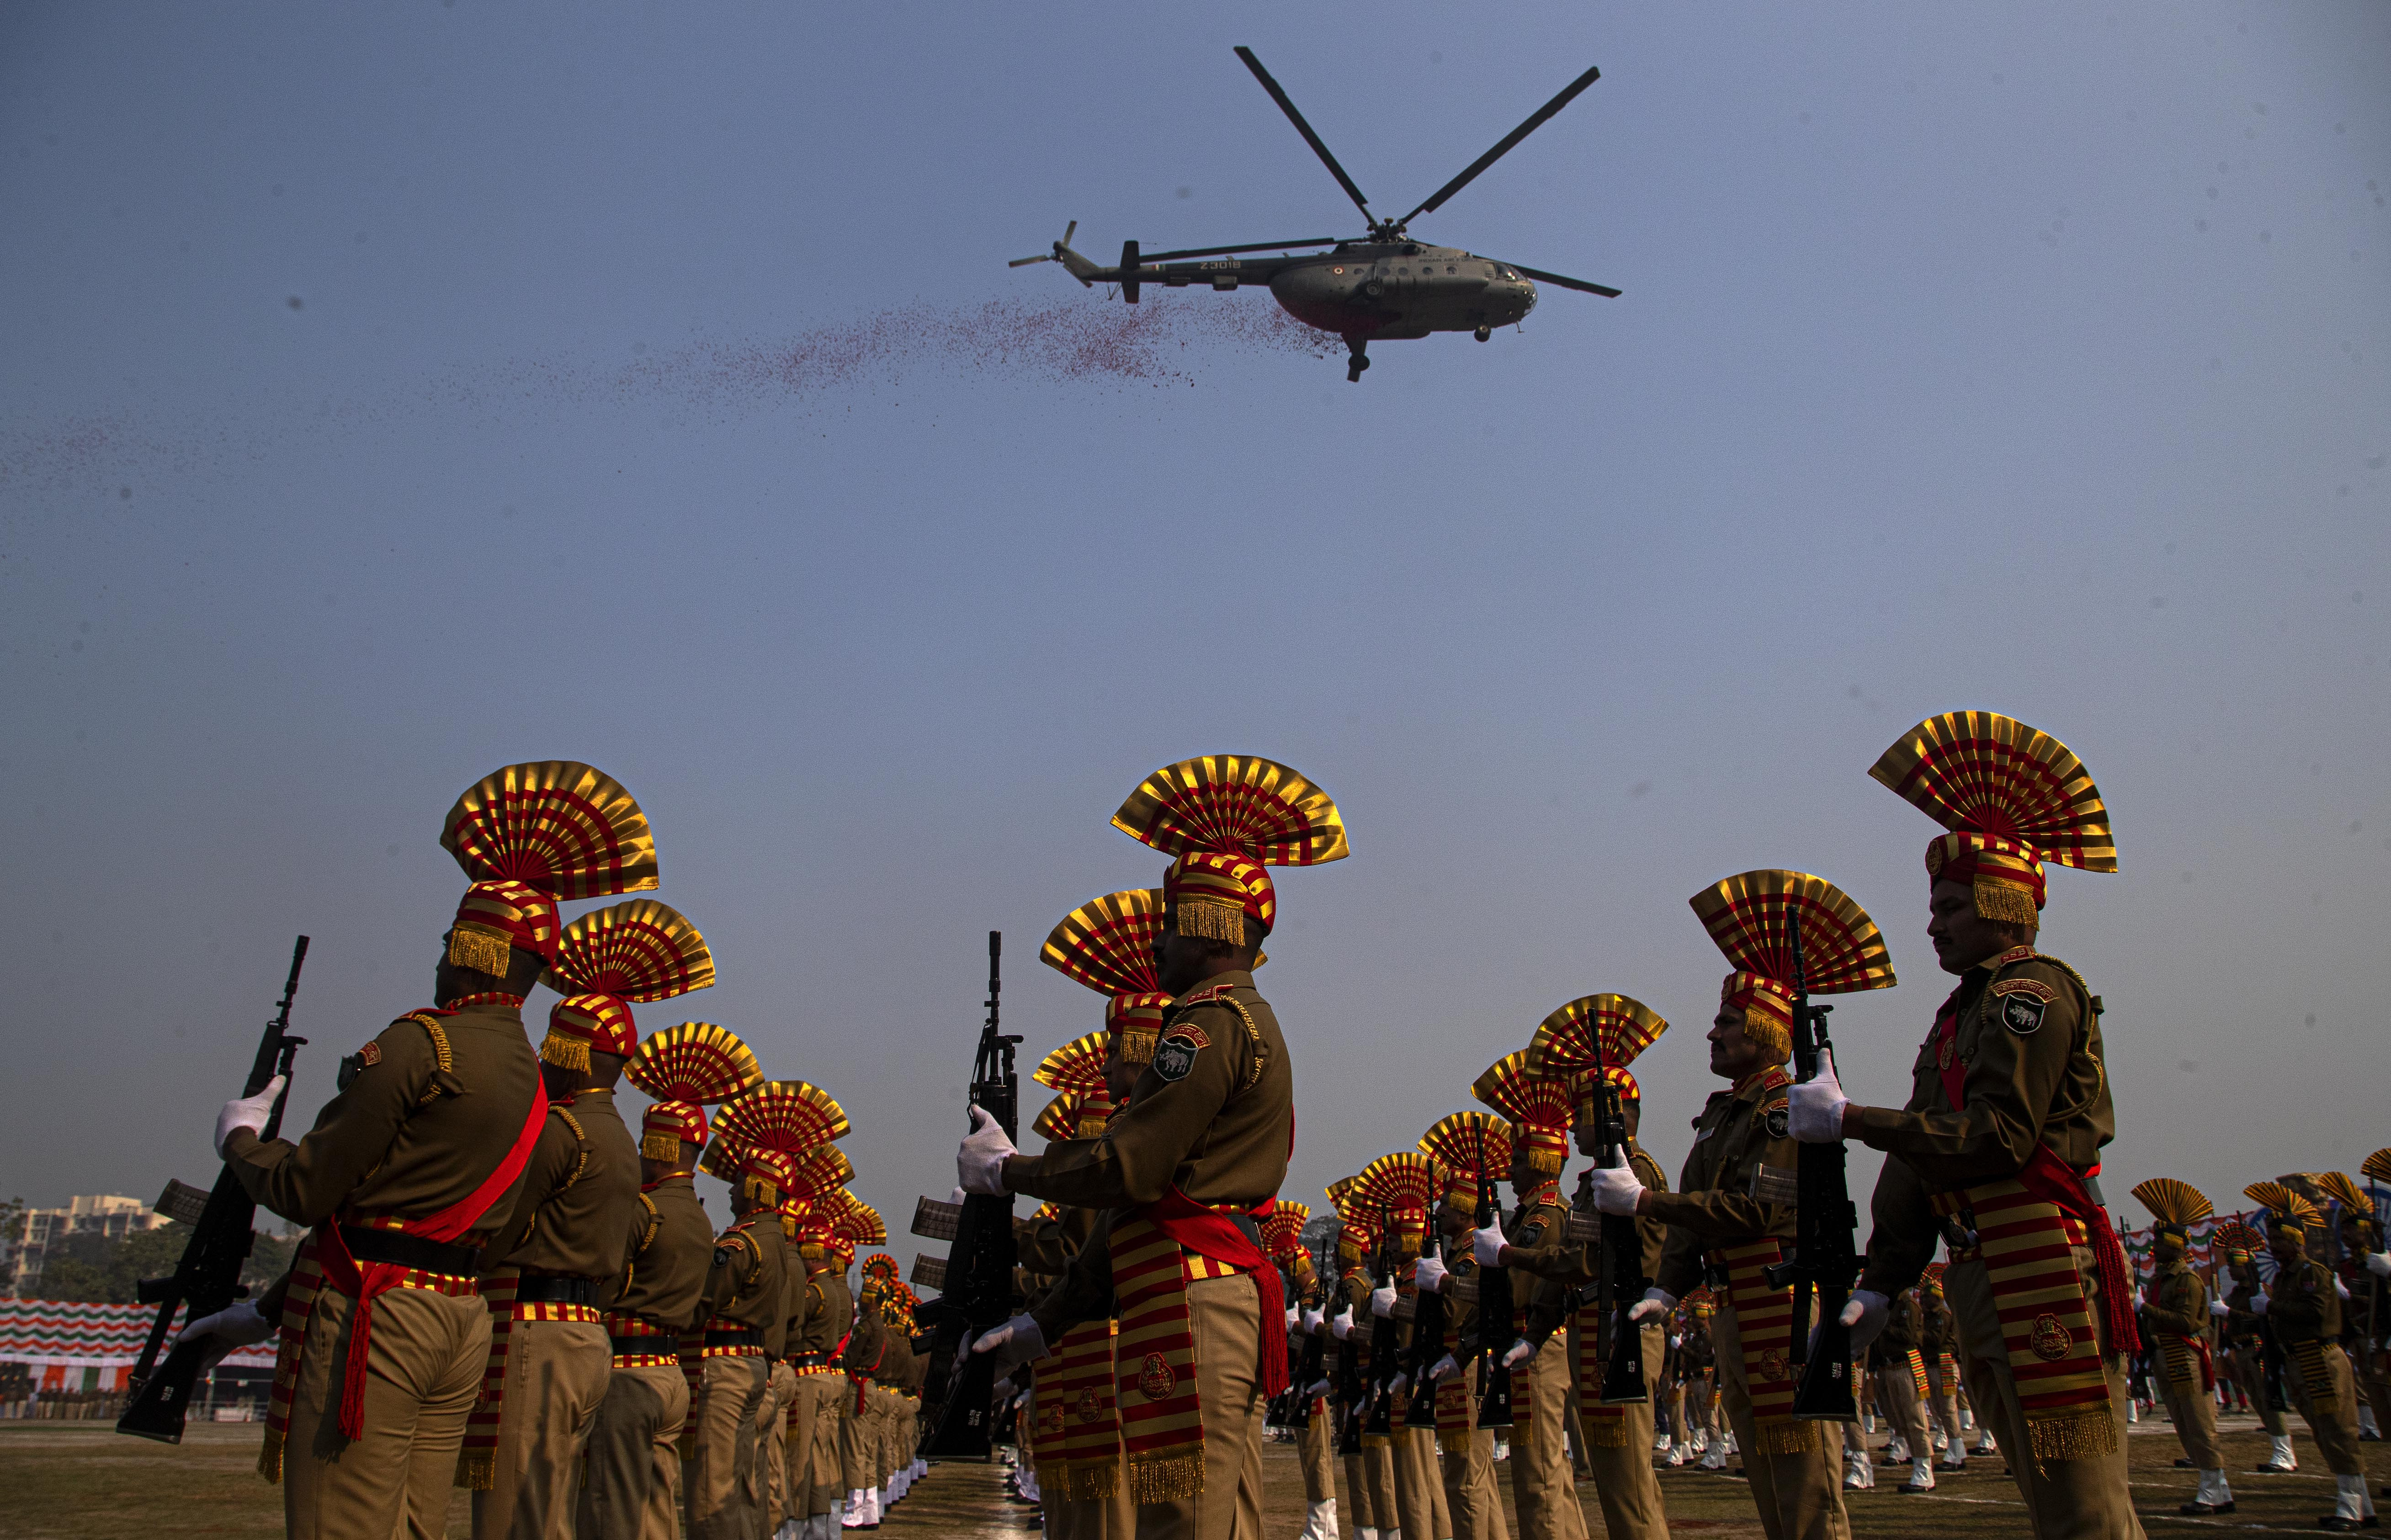 Helicopter flies over marching soldiers